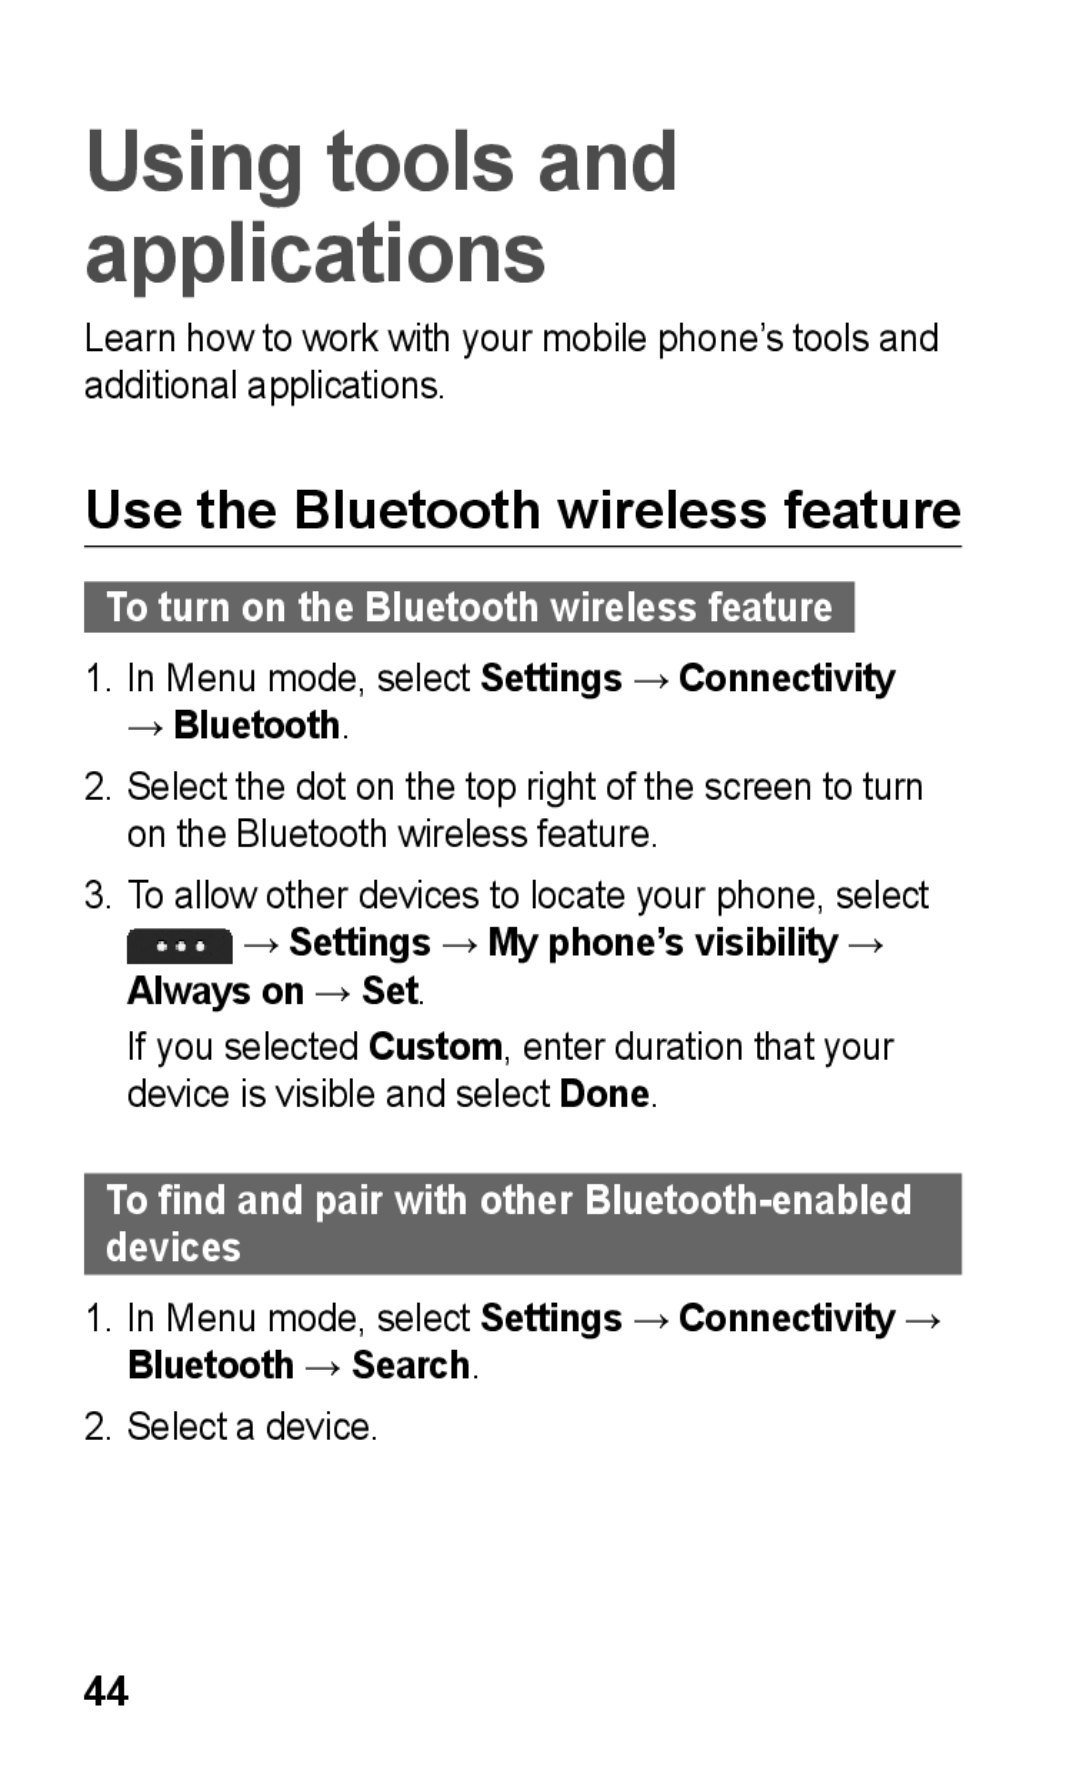 Samsung GT-S5260OKPXEF, GT-S5260RWPDBT, GT-S5260OKPDBT Using tools and applications, Use the Bluetooth wireless feature 